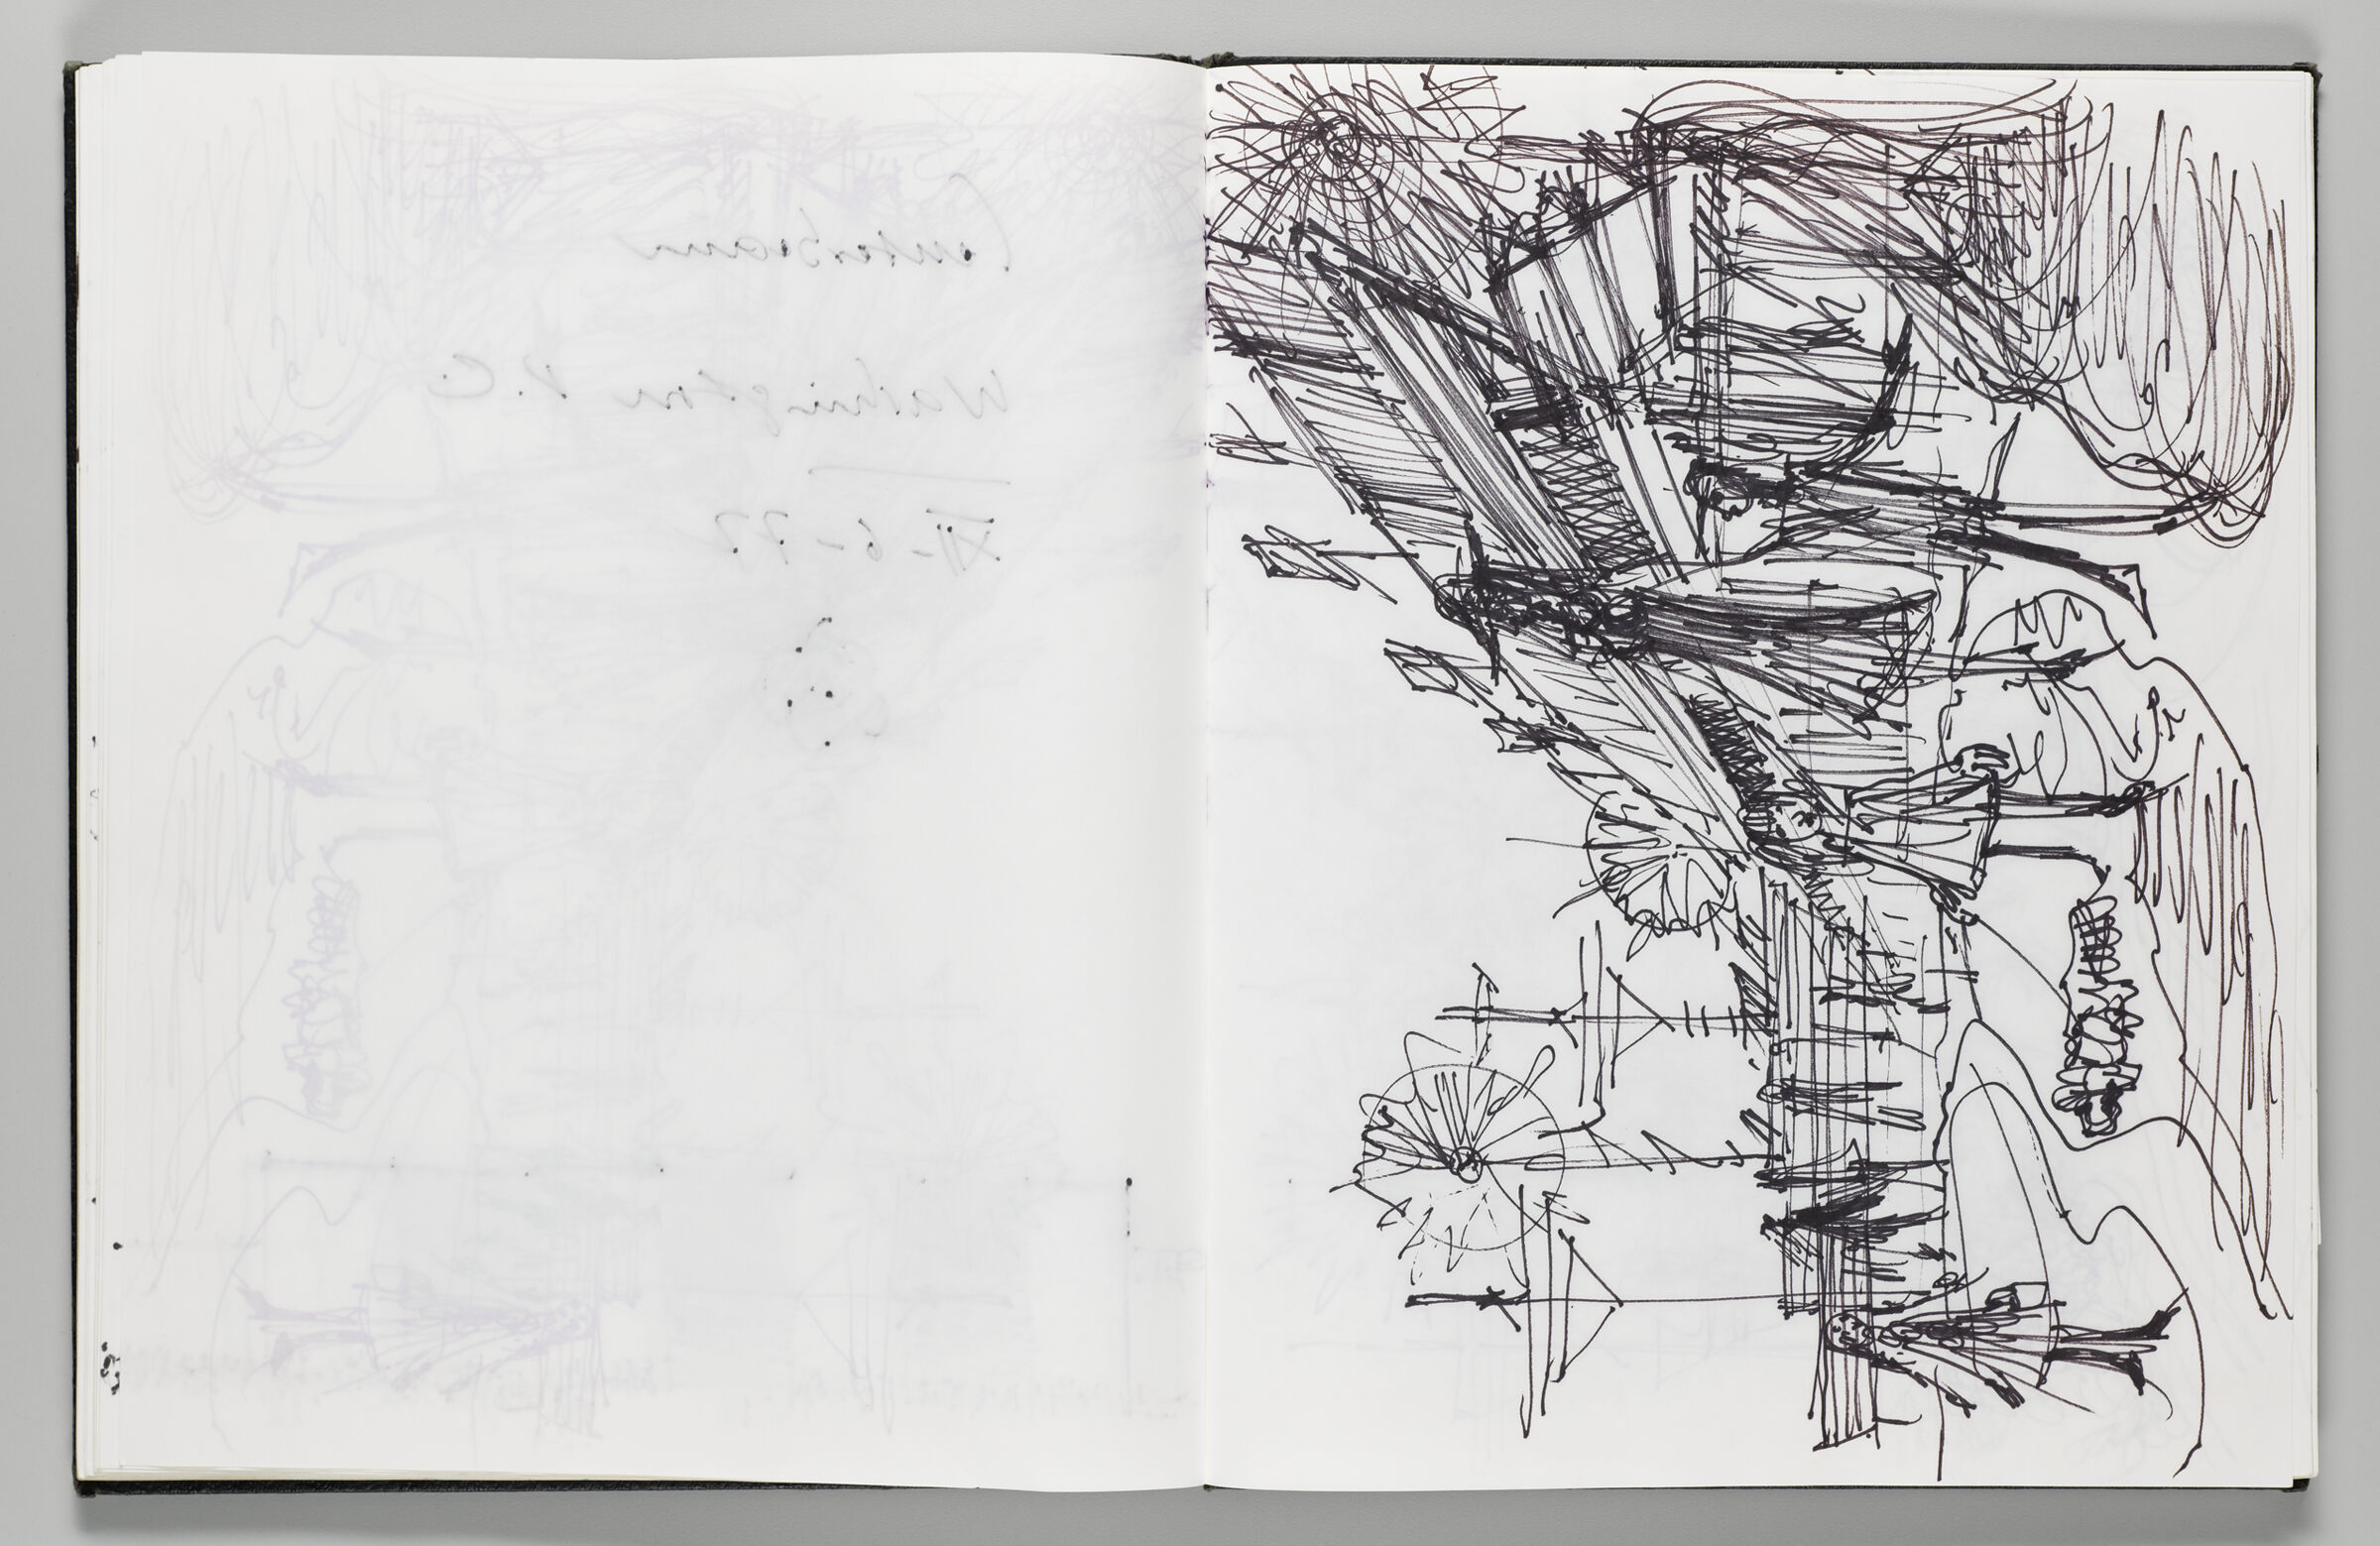 Untitled (Bleed-Through Of Previous Page And Color Transfer, Left Page); Untitled (Centerbeam Sketch, Right Page)